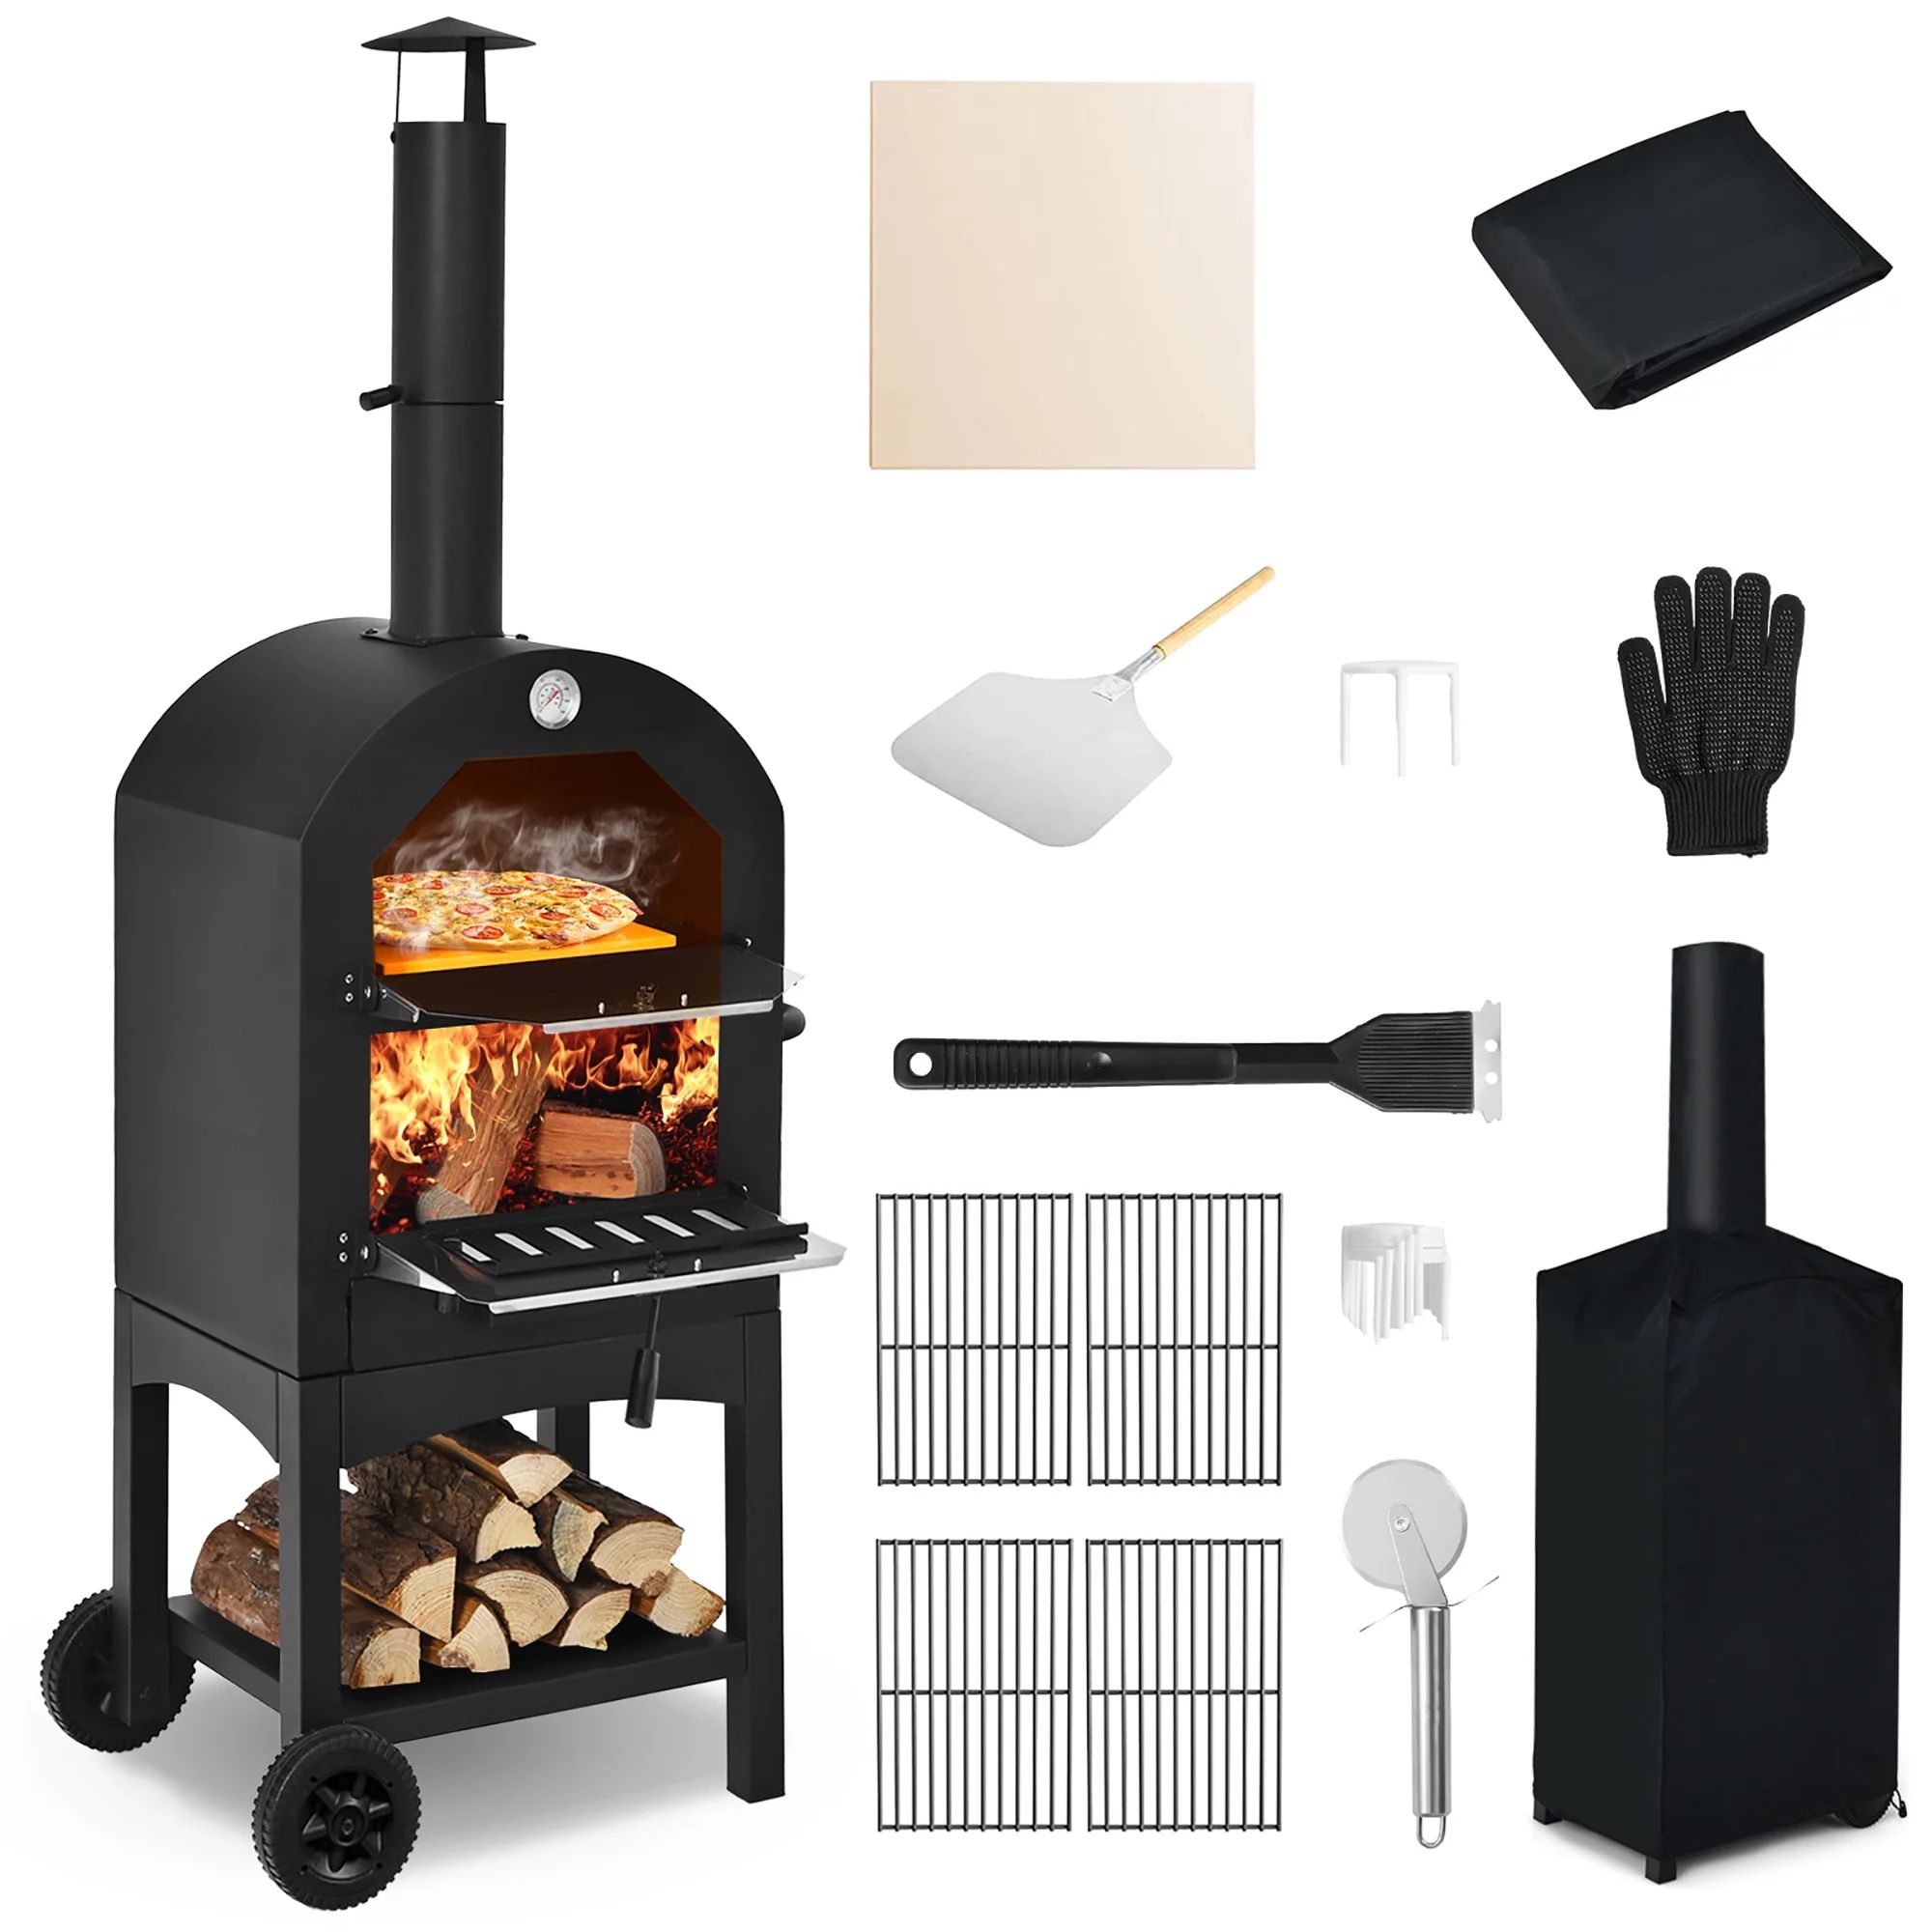 Costway Outdoor Pizza Oven Wood Fire Pizza Maker Grill w/ Pizza Stone & Waterproof Cover | Walmart (US)